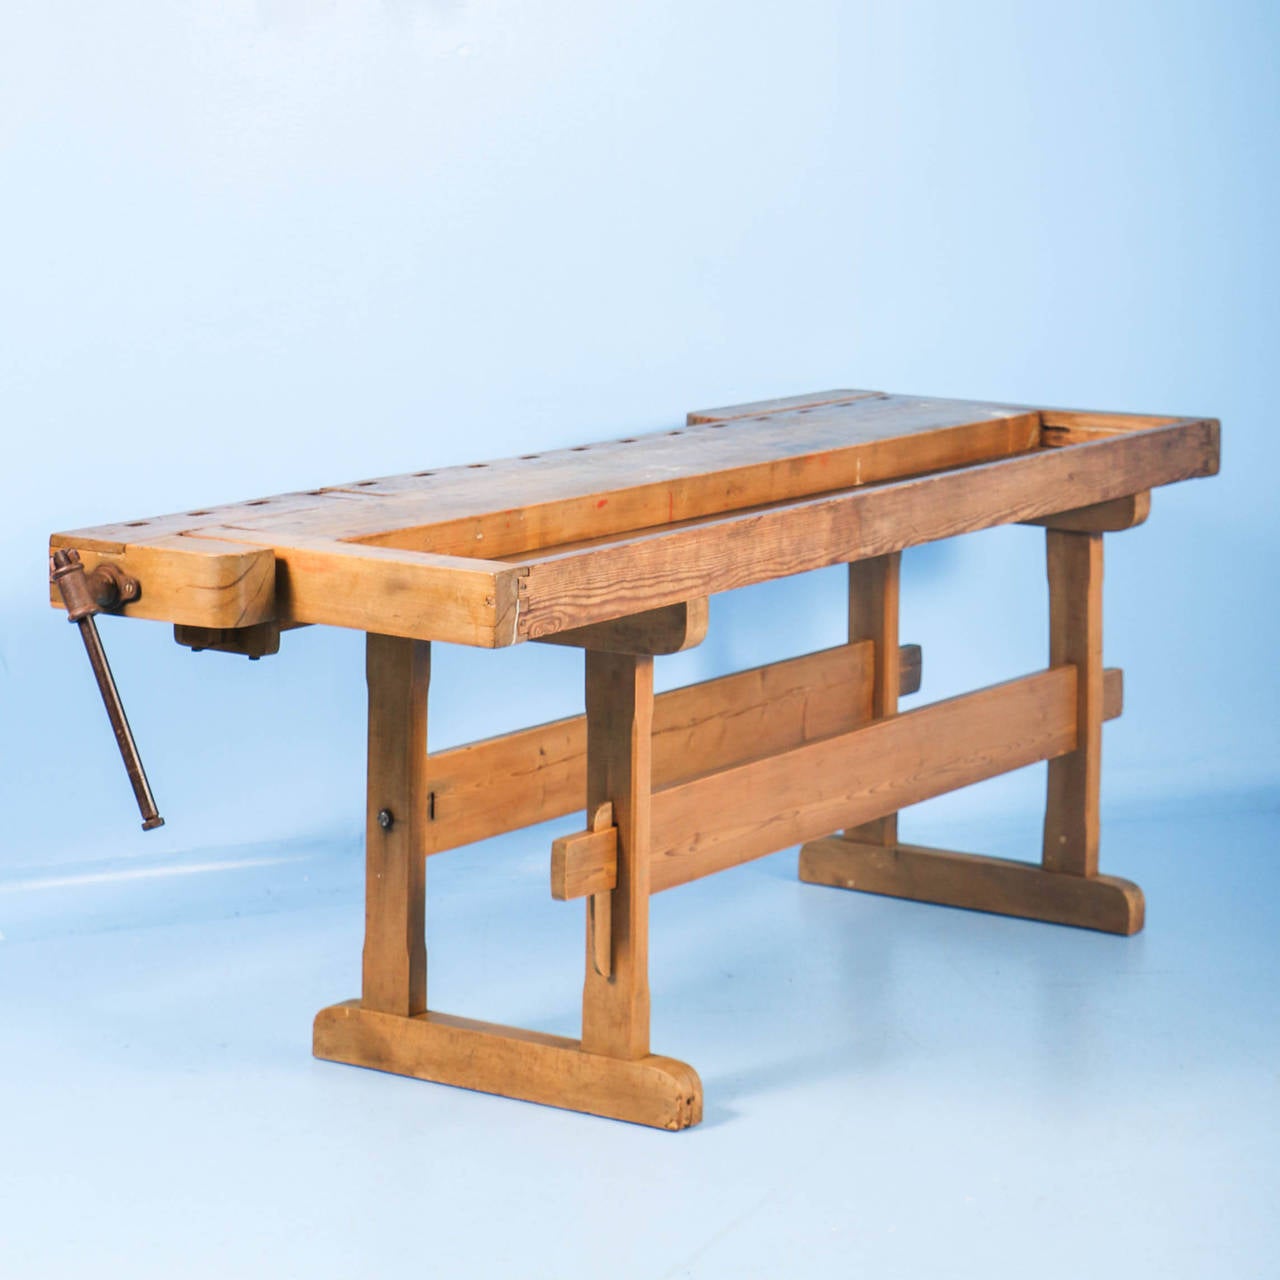 The light pine patina on this workbench comes from the years of constant use. It has two vices(one with iron handle, one of wood) and a recessed tray where the carpenter would lay his tools. The traditional trestle base allowed it to be assembled